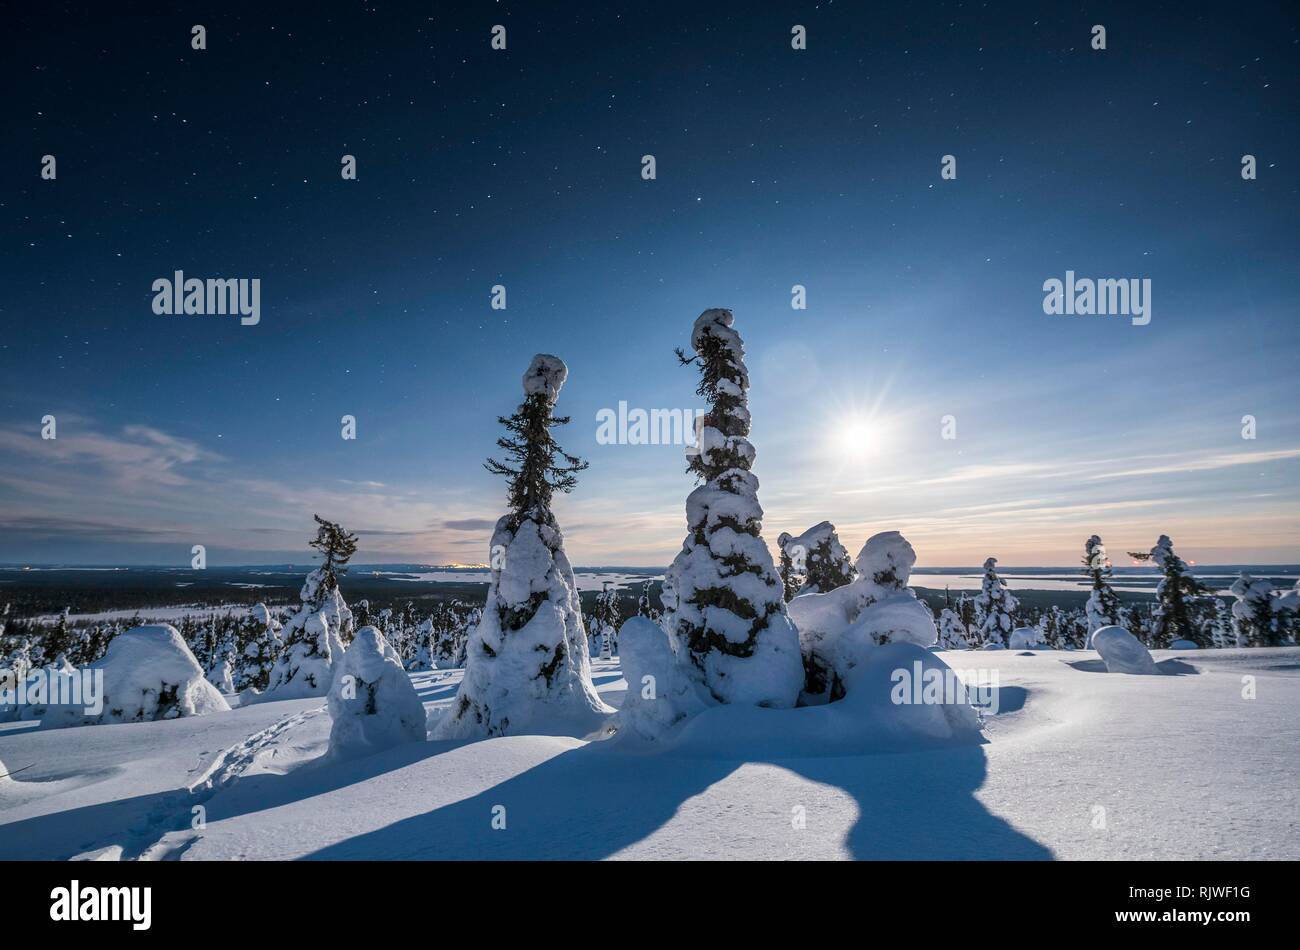 Night shot with starry sky in winter, snow-covered Pines (Pinus) in Riisitunturi National Park, Posio, Lapland, Finland Stock Photo